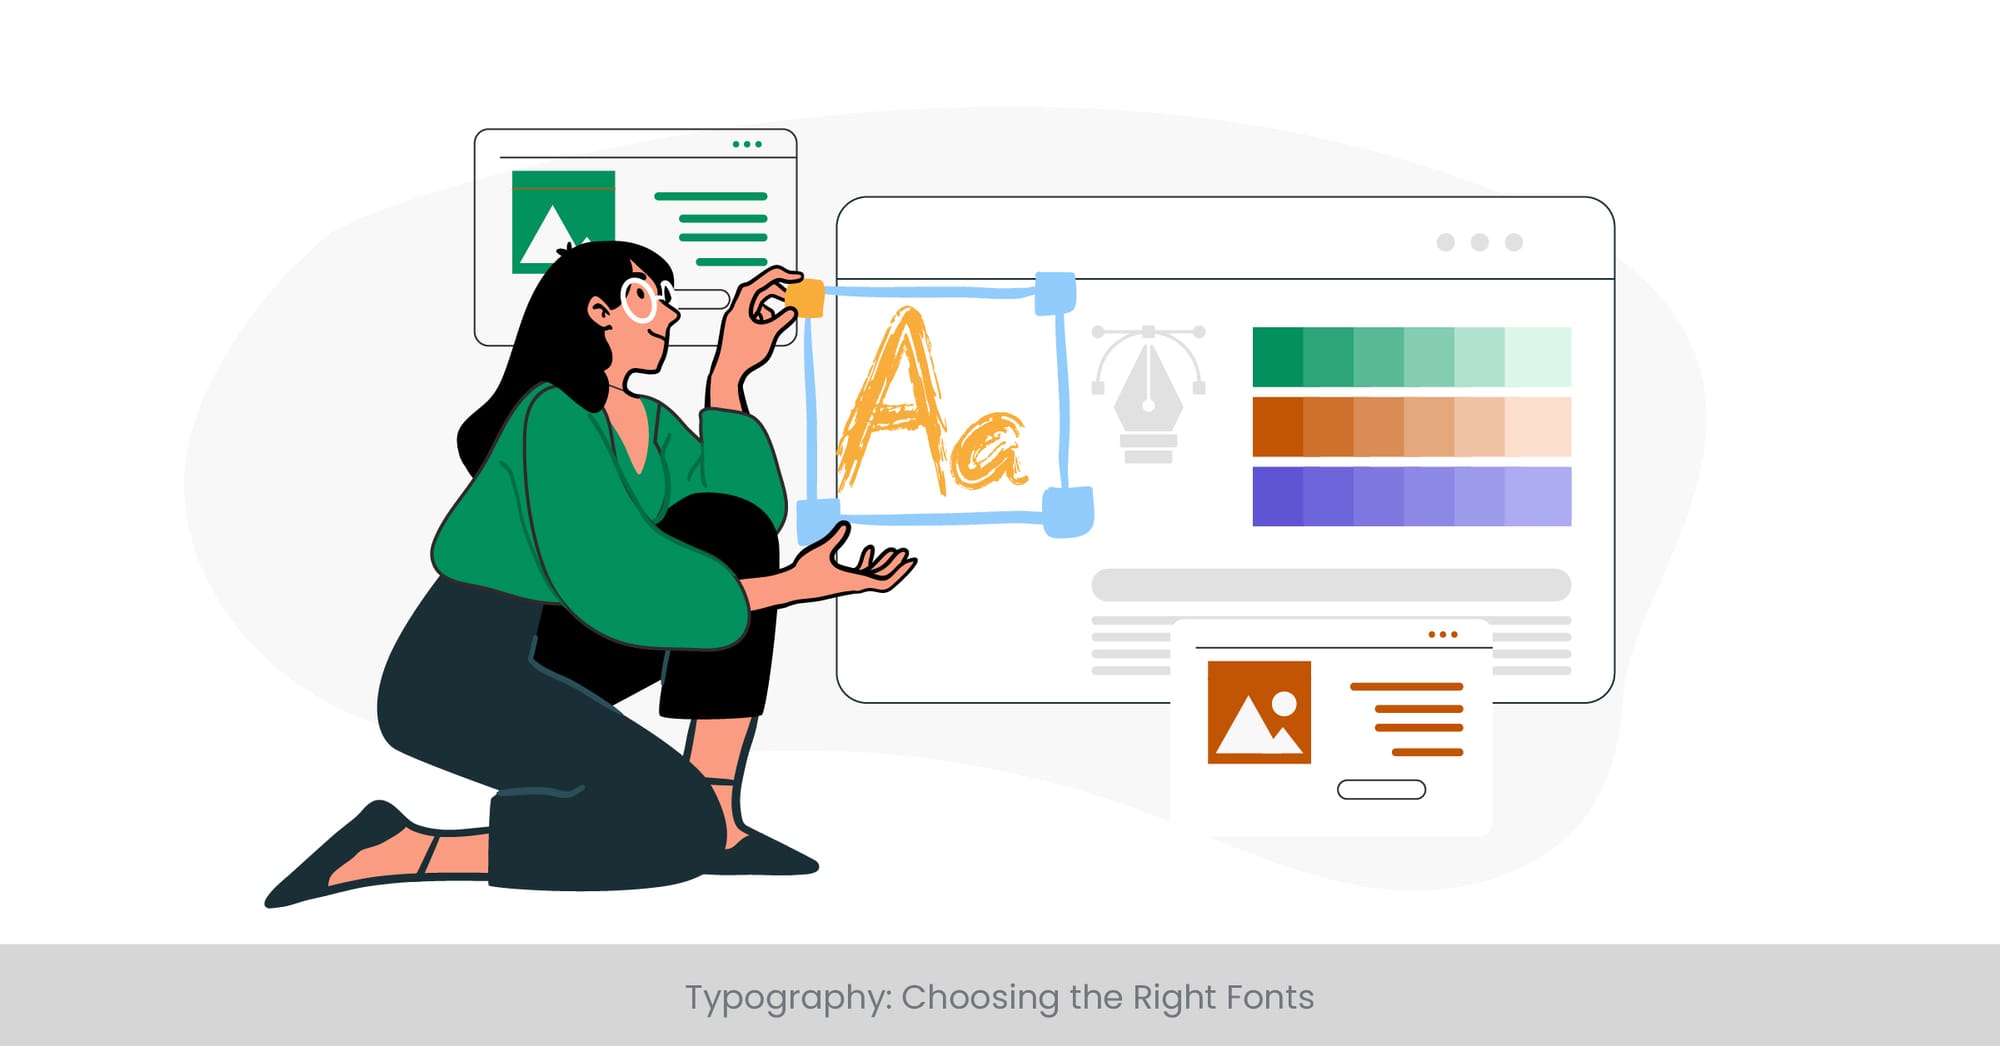 Typography: Choosing the Right Fonts